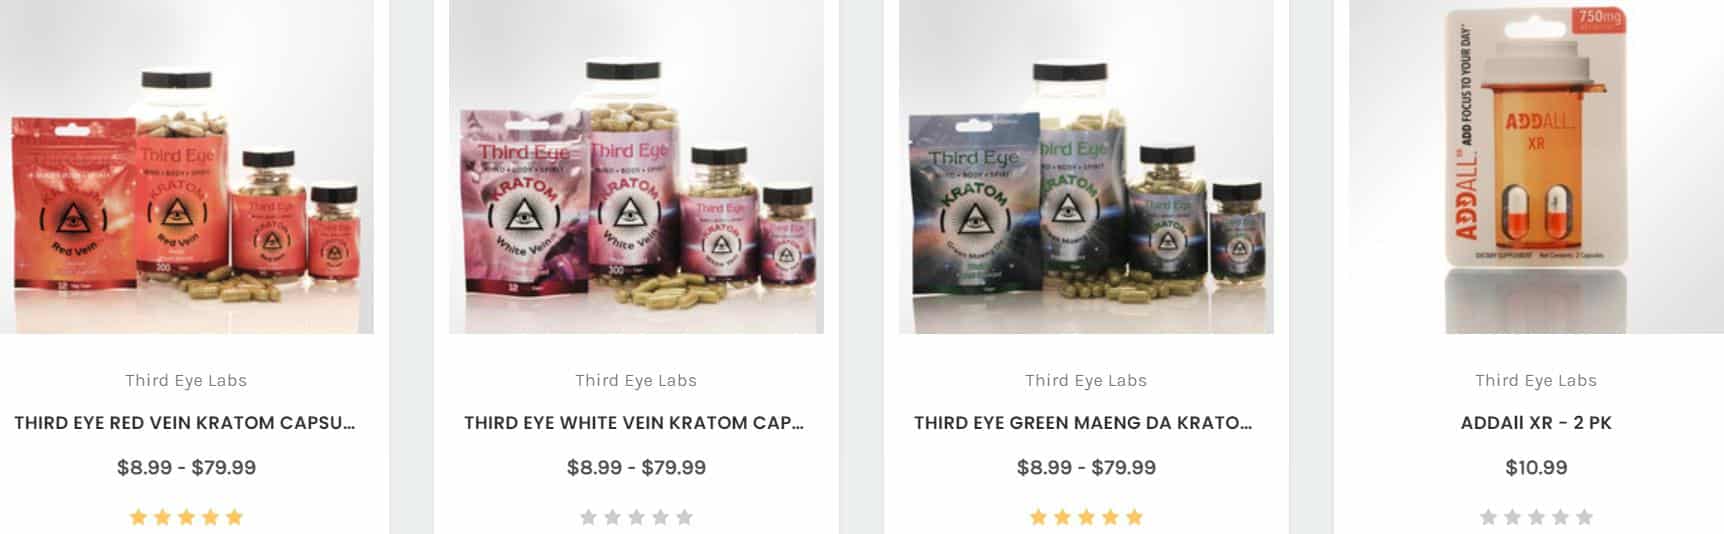 image of third eye labs kratom products